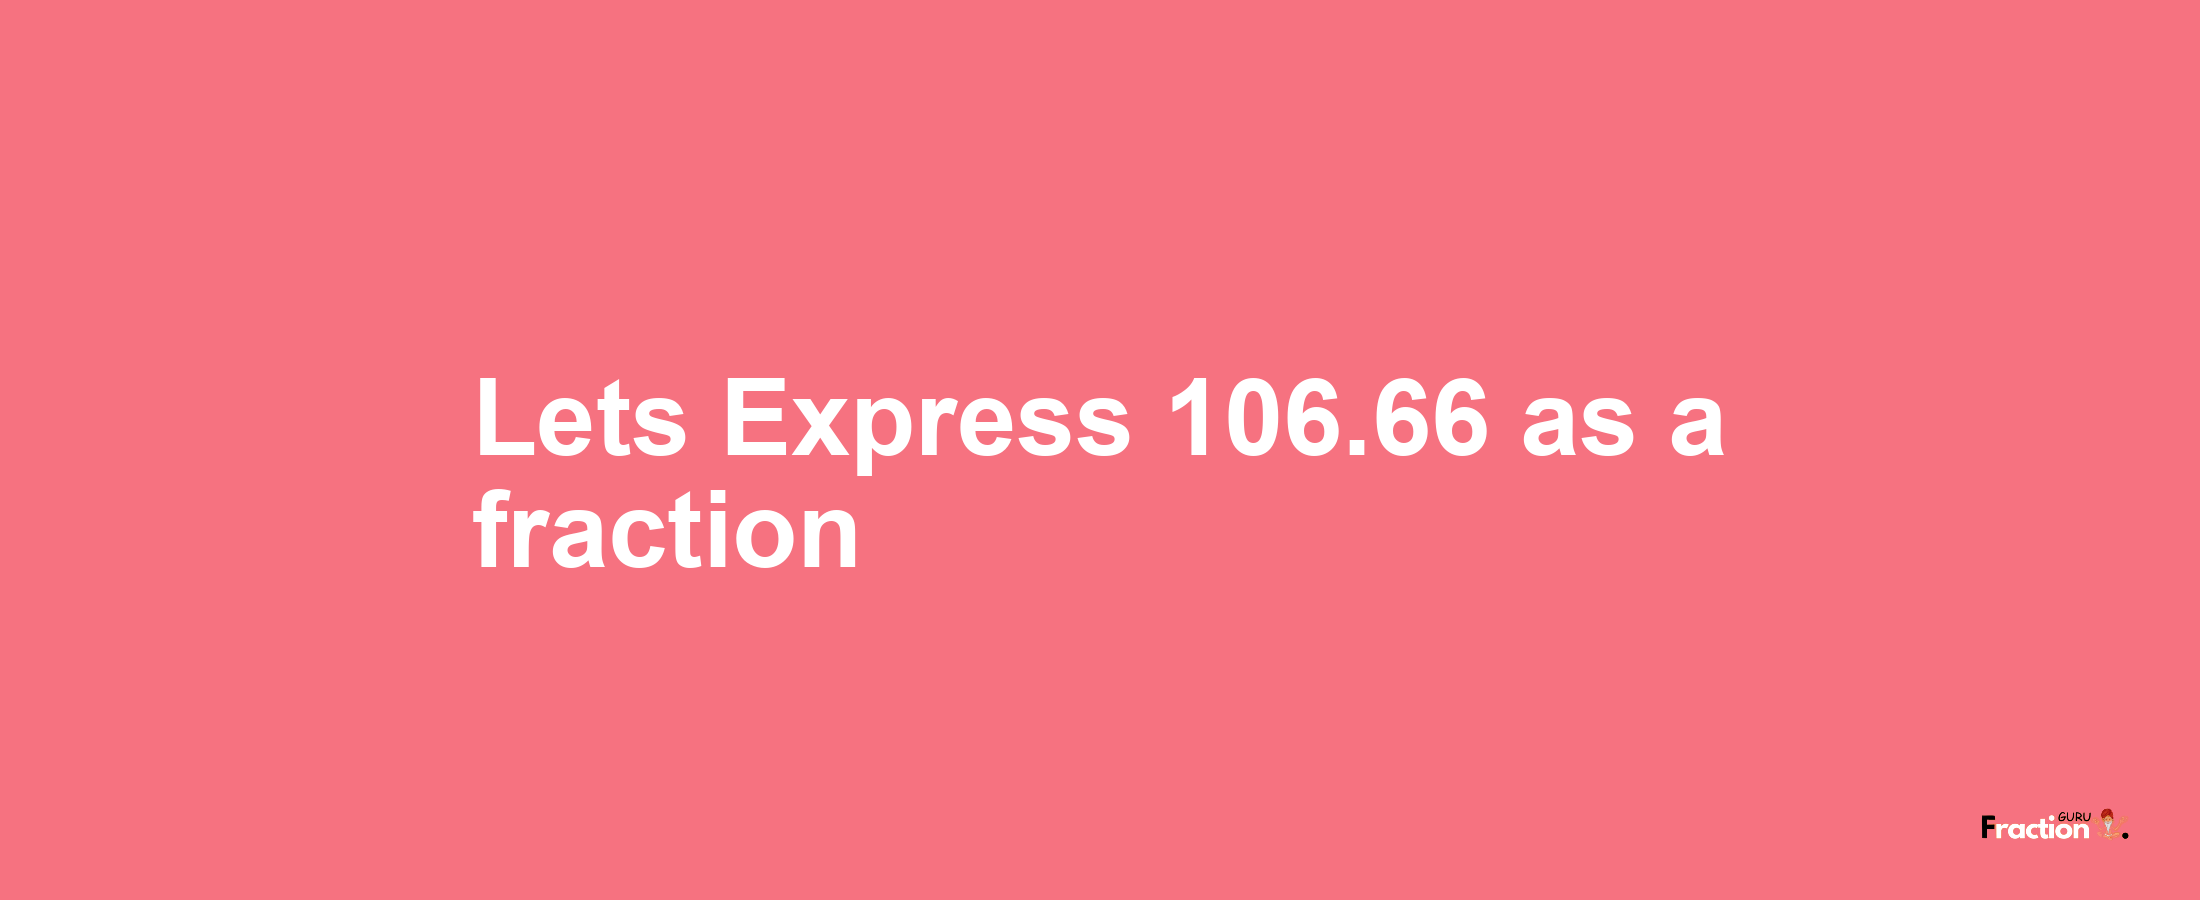 Lets Express 106.66 as afraction